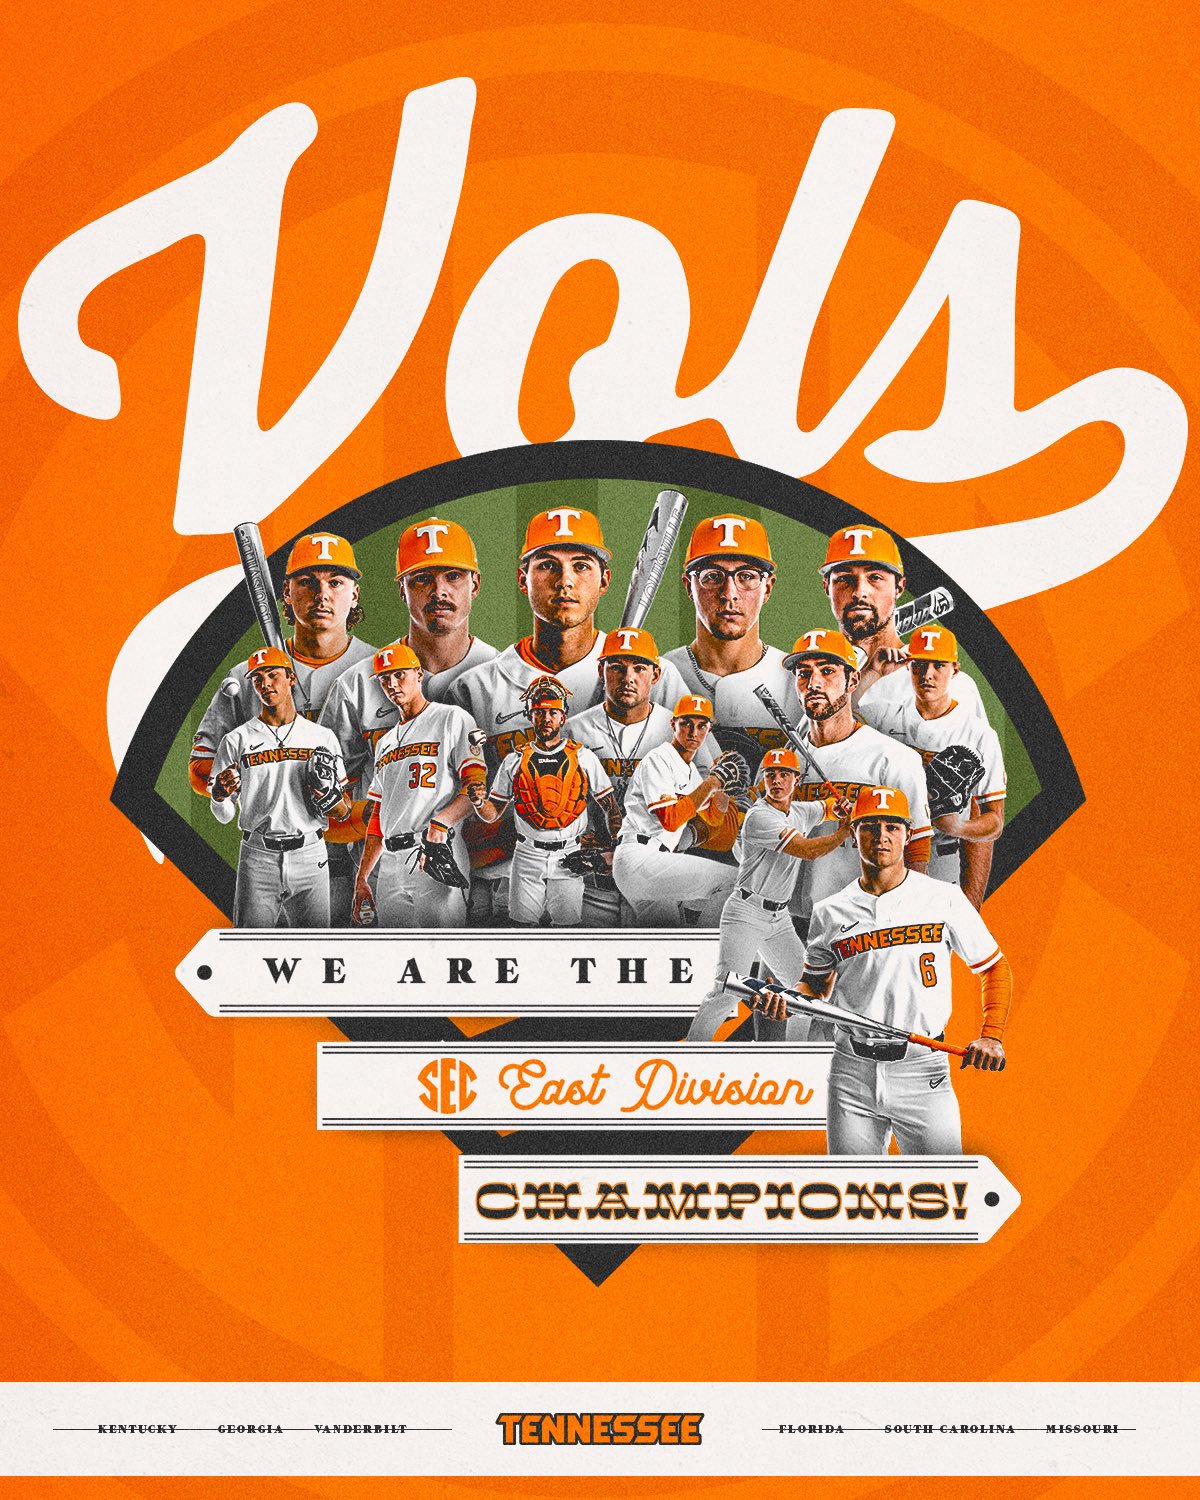 Tennessee Baseball on X: For the first time since 1997, your